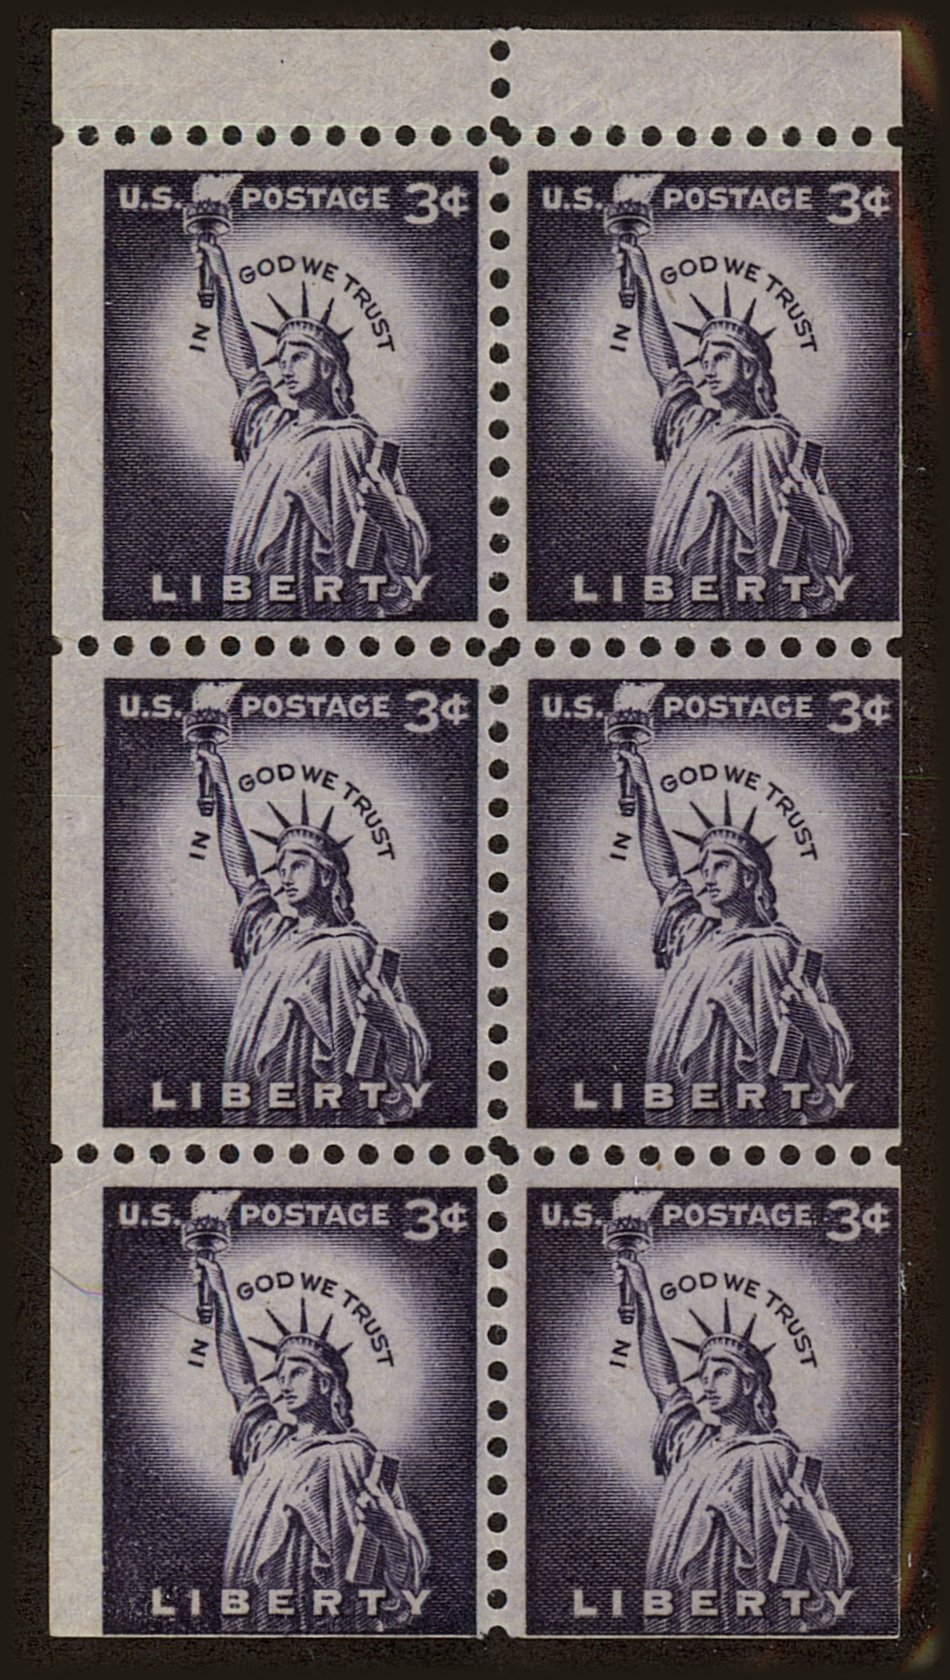 Front view of United States 1035a collectors stamp